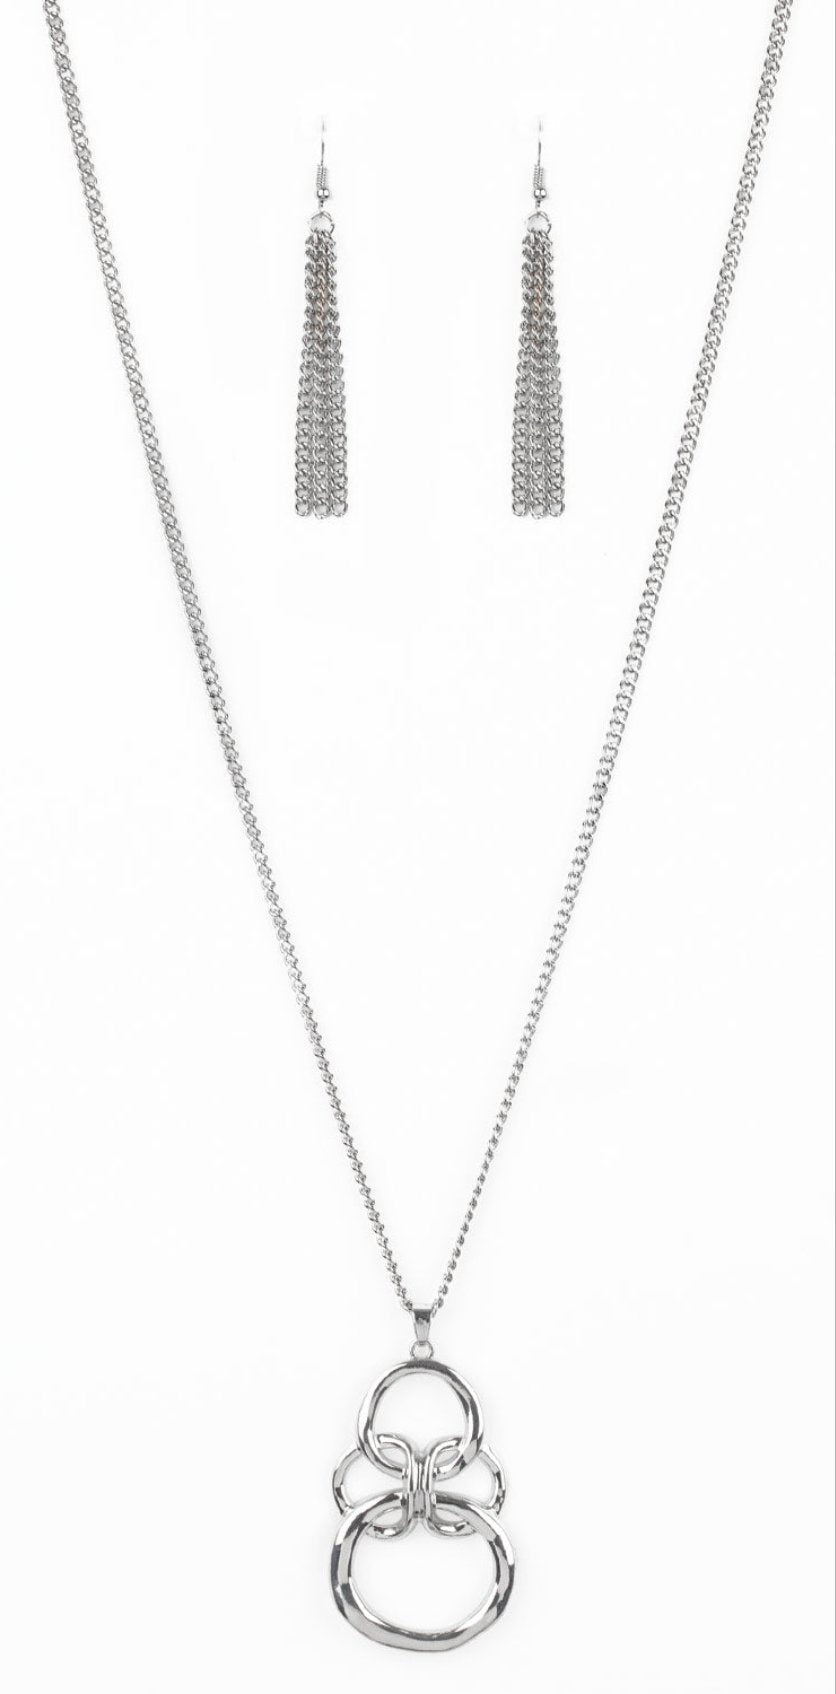 Courageous Contour Silver Necklace and Earrings